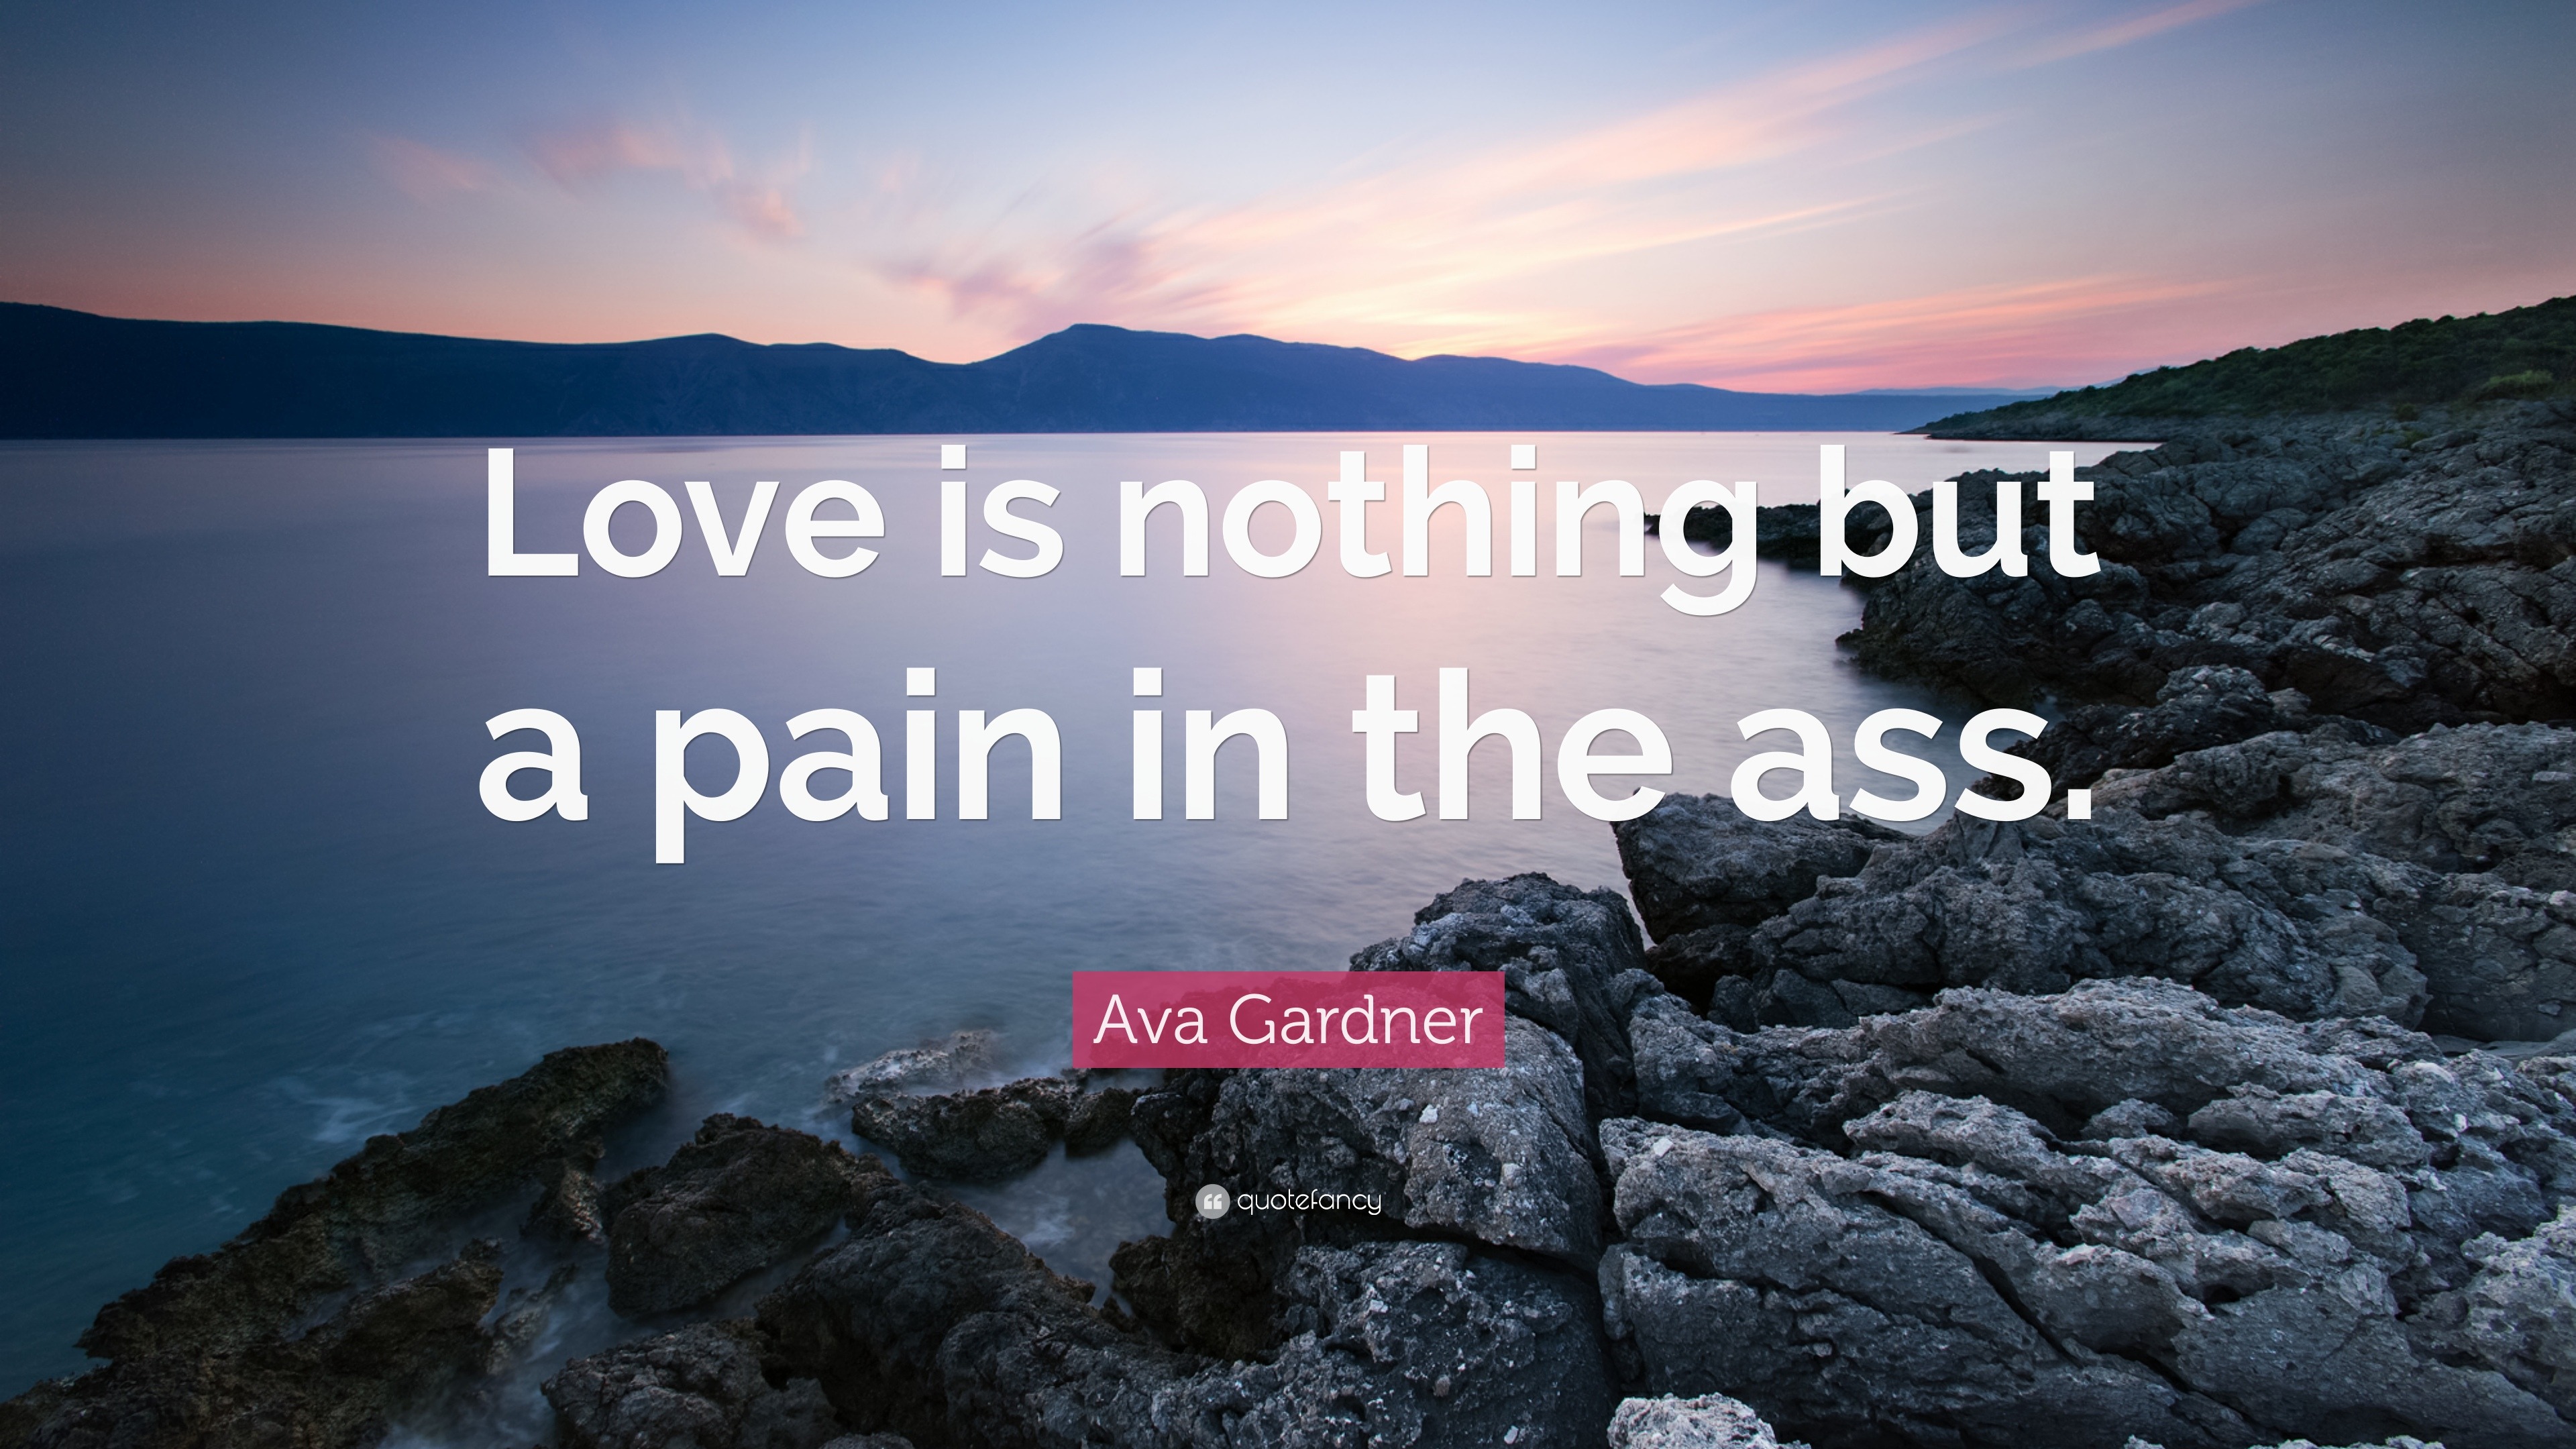 Ava Gardner Quote: “Love is nothing but